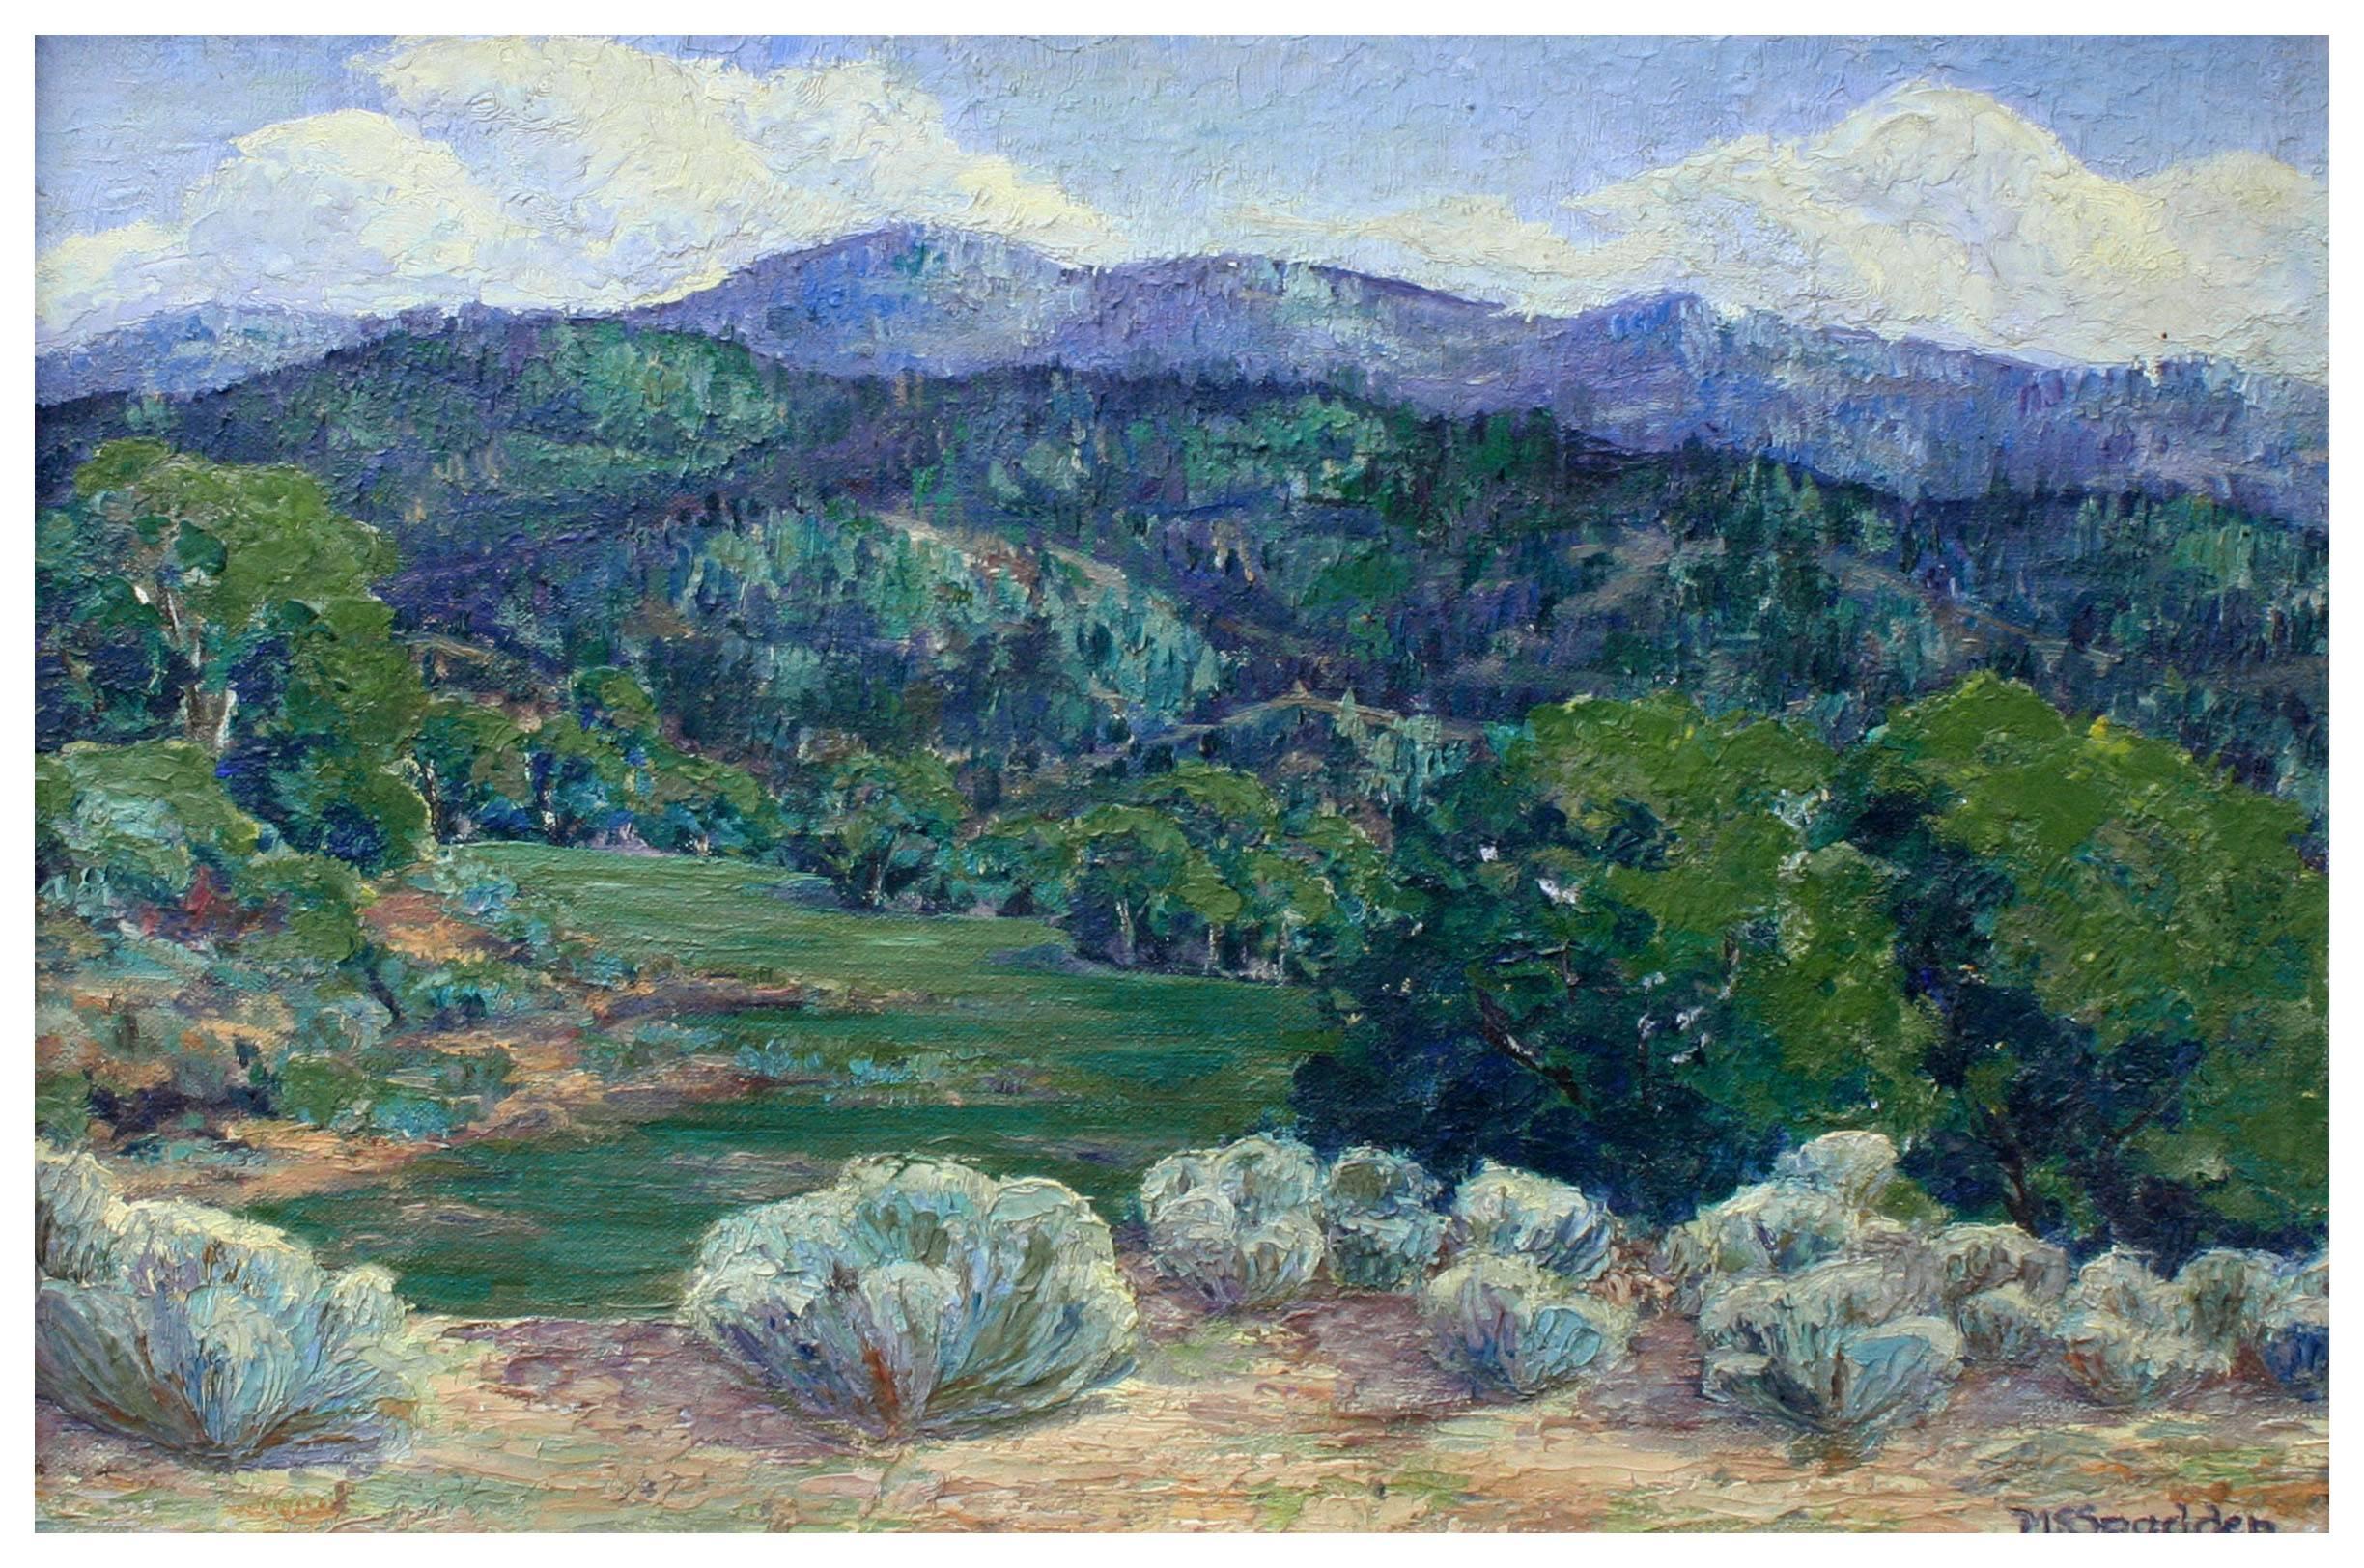 Mouth of the Canyon - Early 20th Century Taos, New Mexico Landscape  - Painting by Unknown